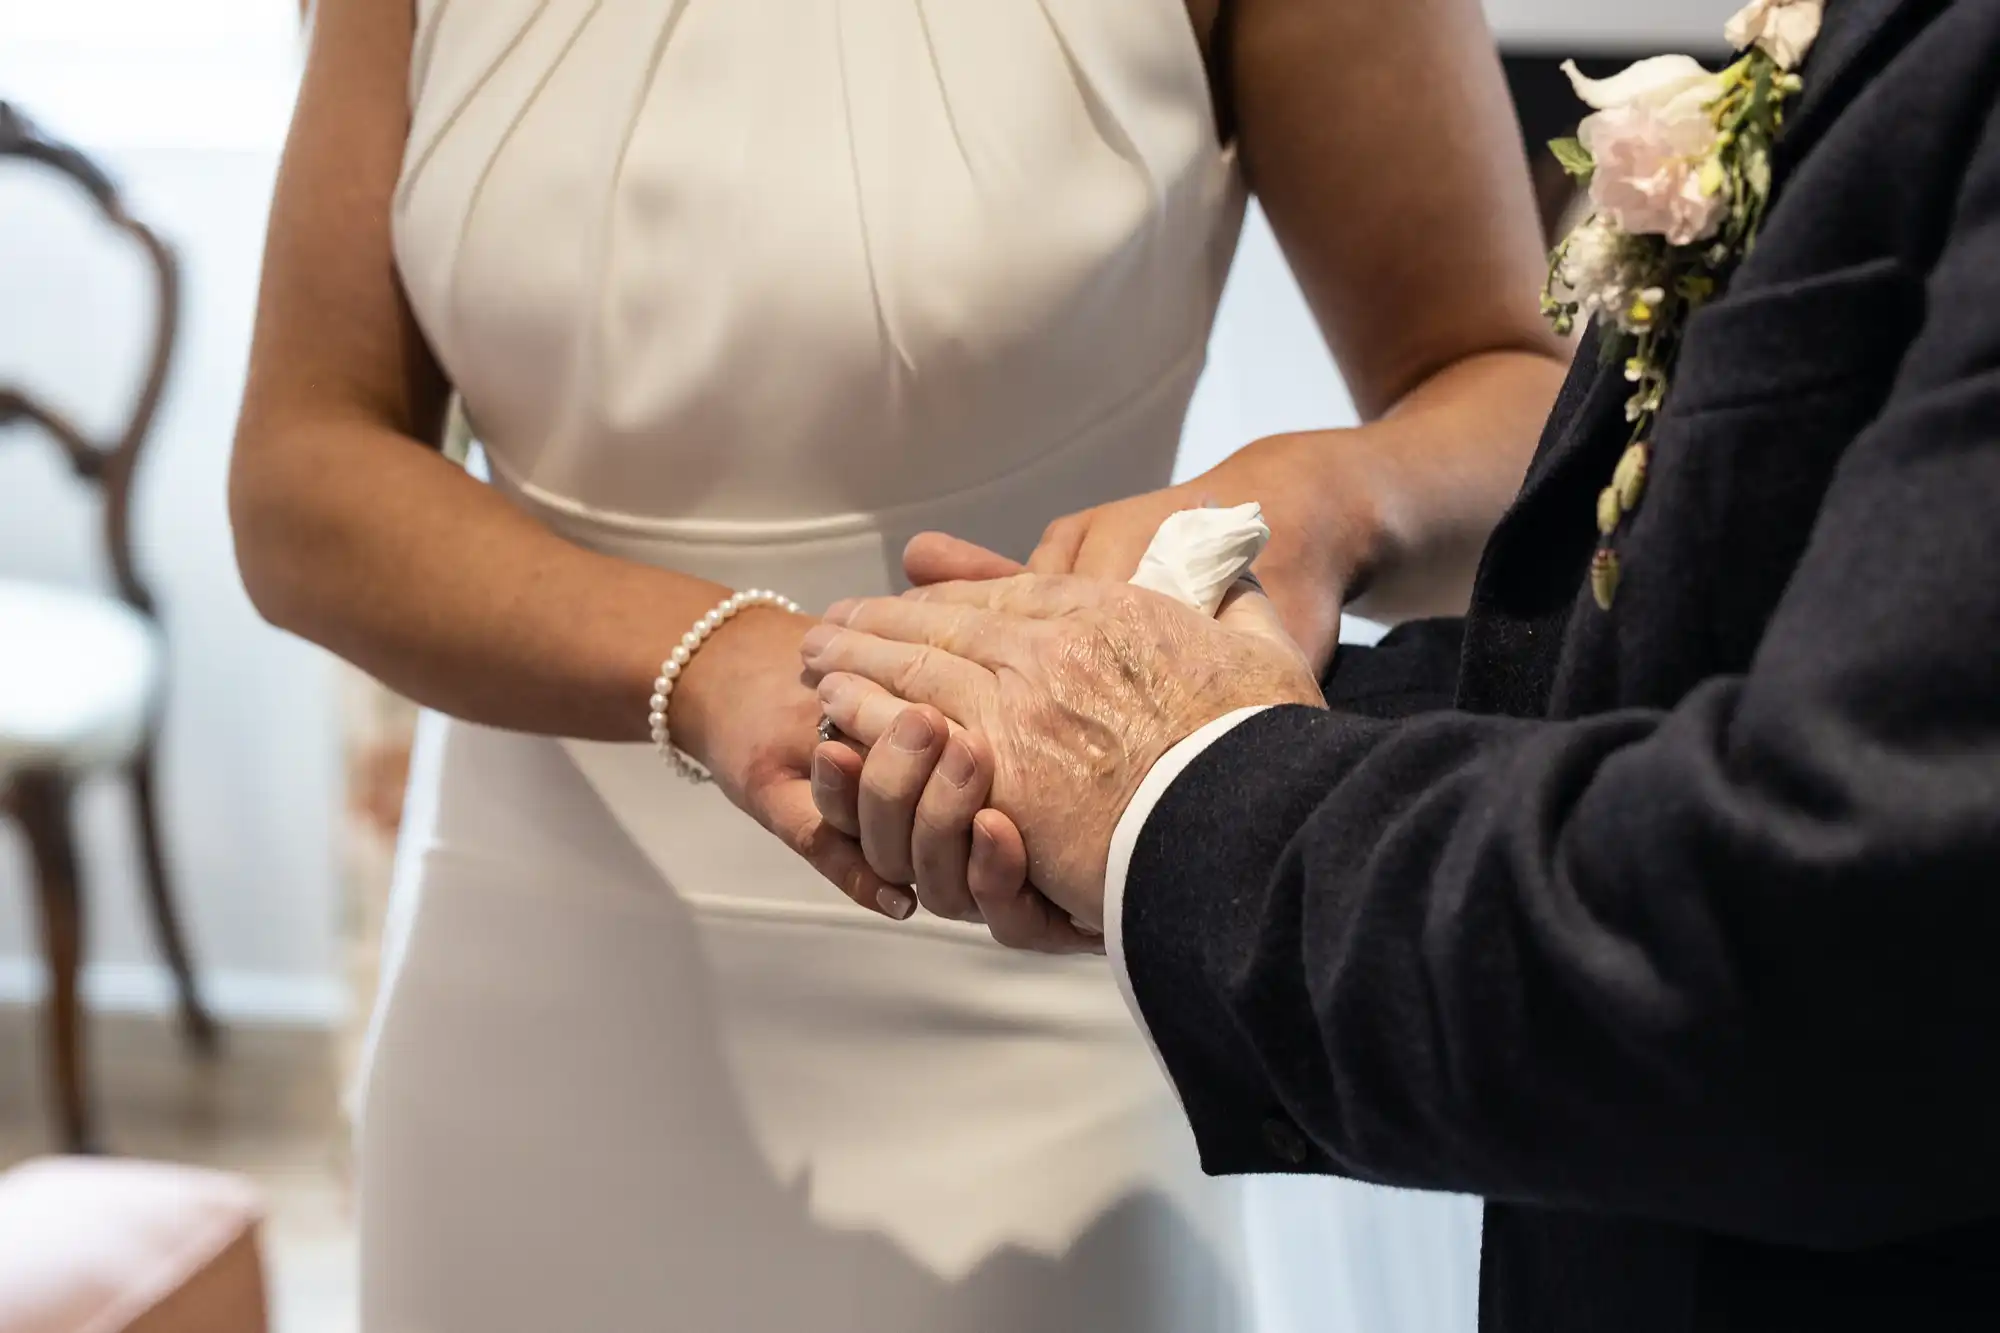 A close-up of a bride and groom holding hands during a wedding ceremony, showcasing their wedding attire and a corsage.